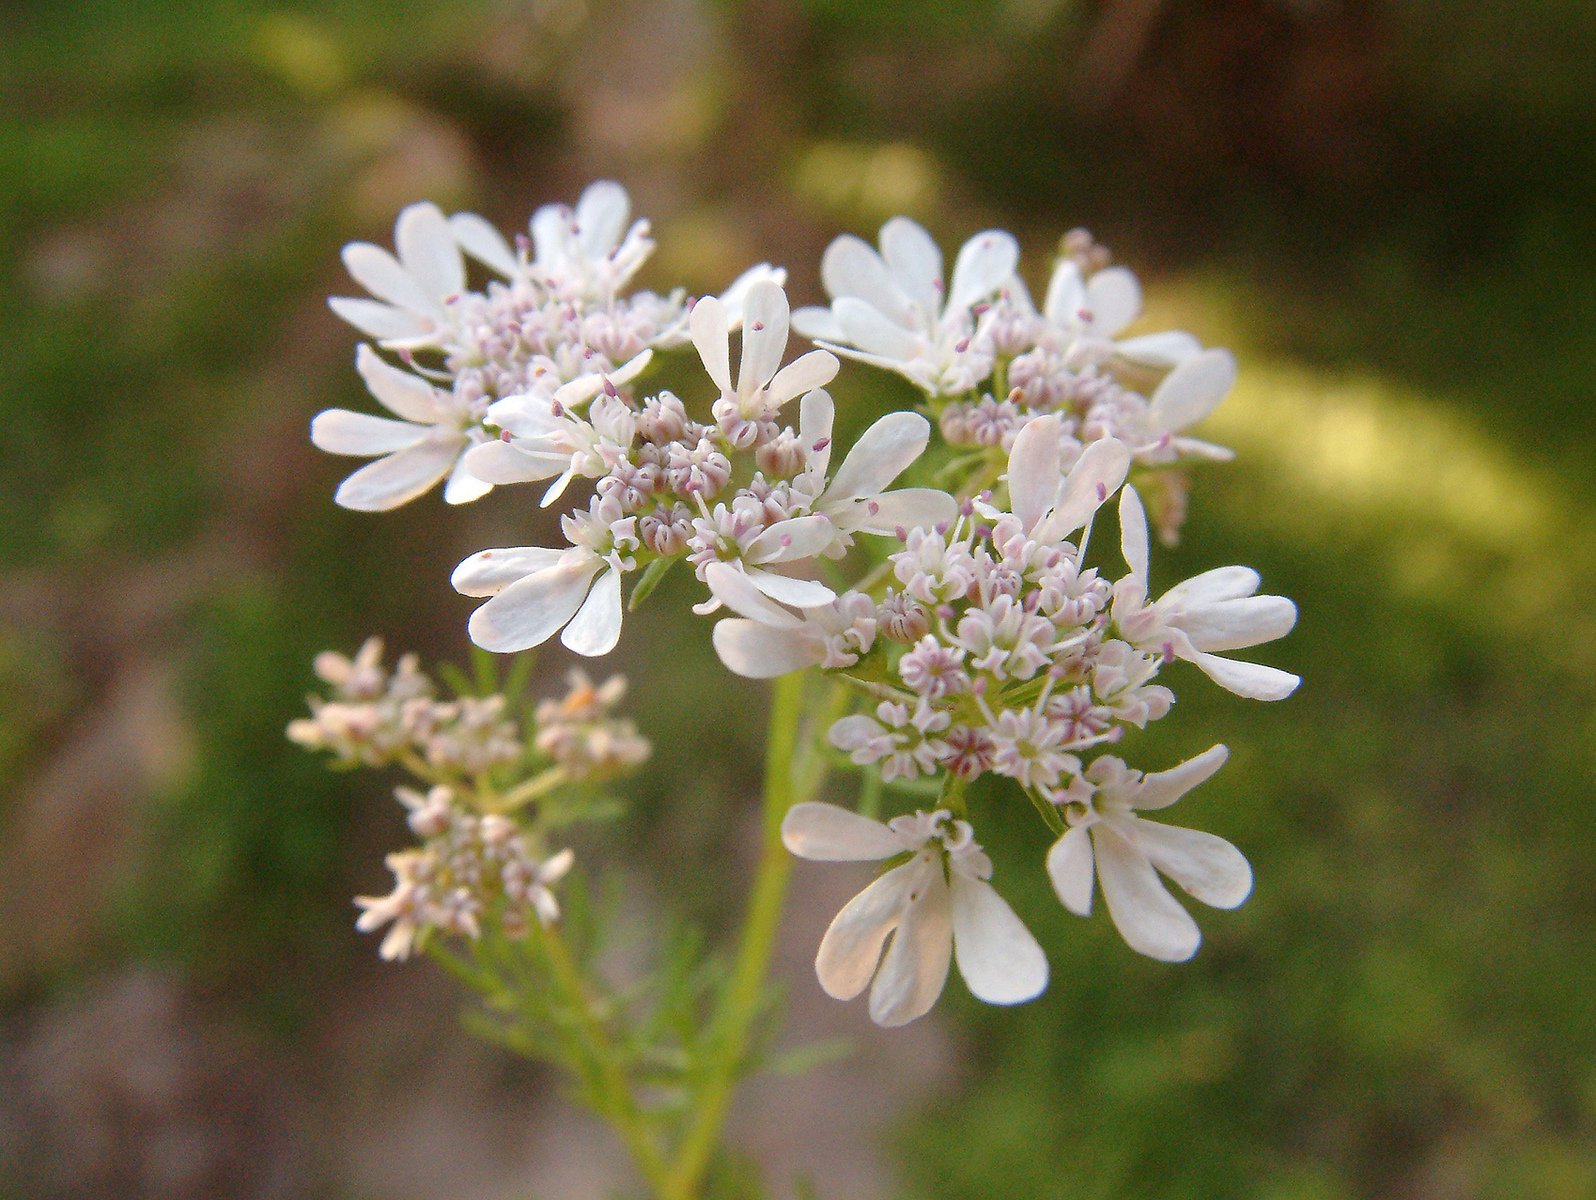 close up image of small white flowers against green background